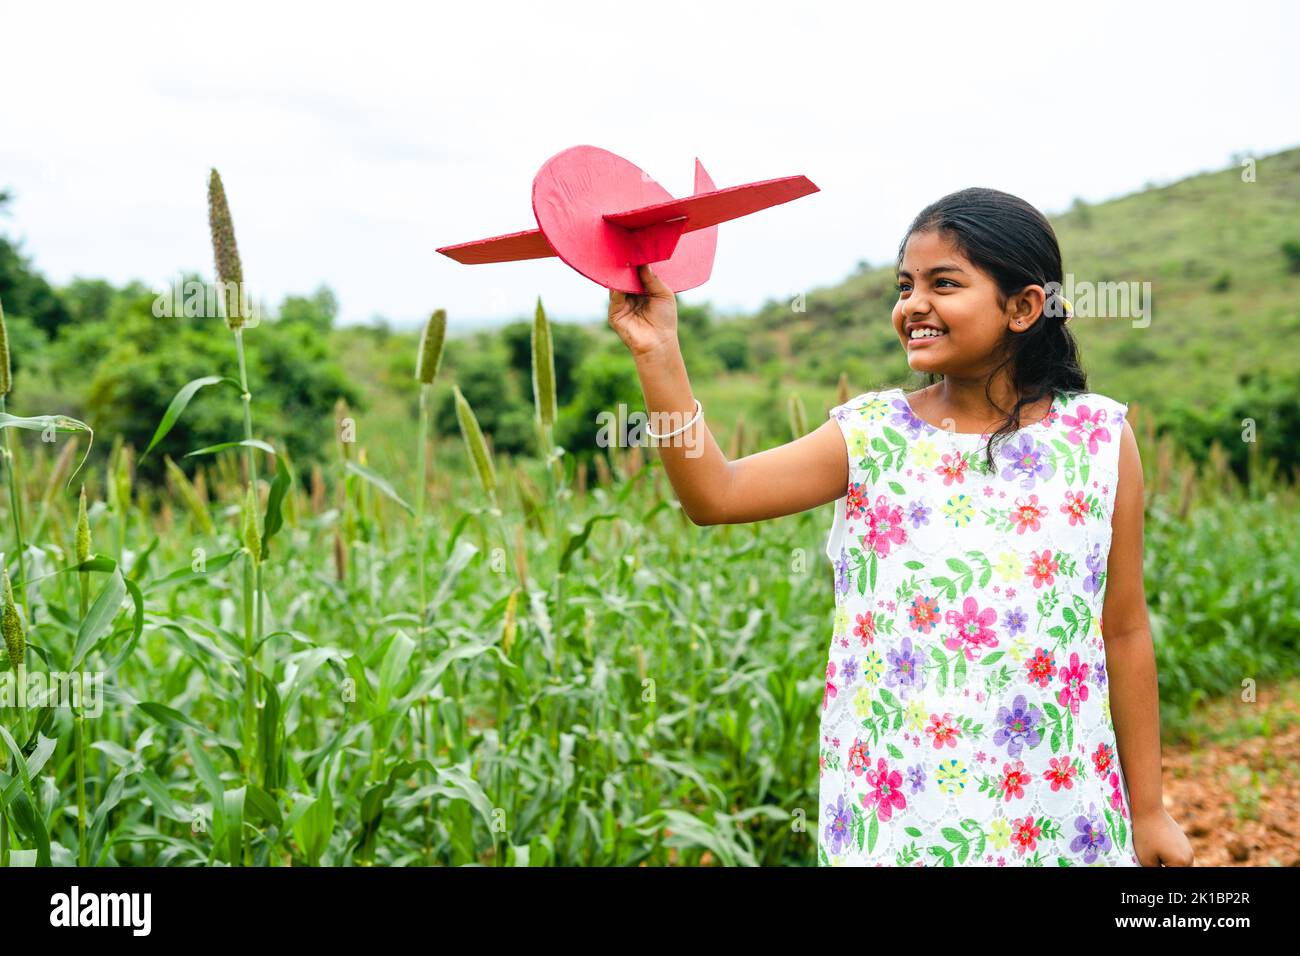 tracking shot of Happy smiling girl kid playing with aeroplane during holidays - concept of freedom, childhood dream and future goal. Stock Photo